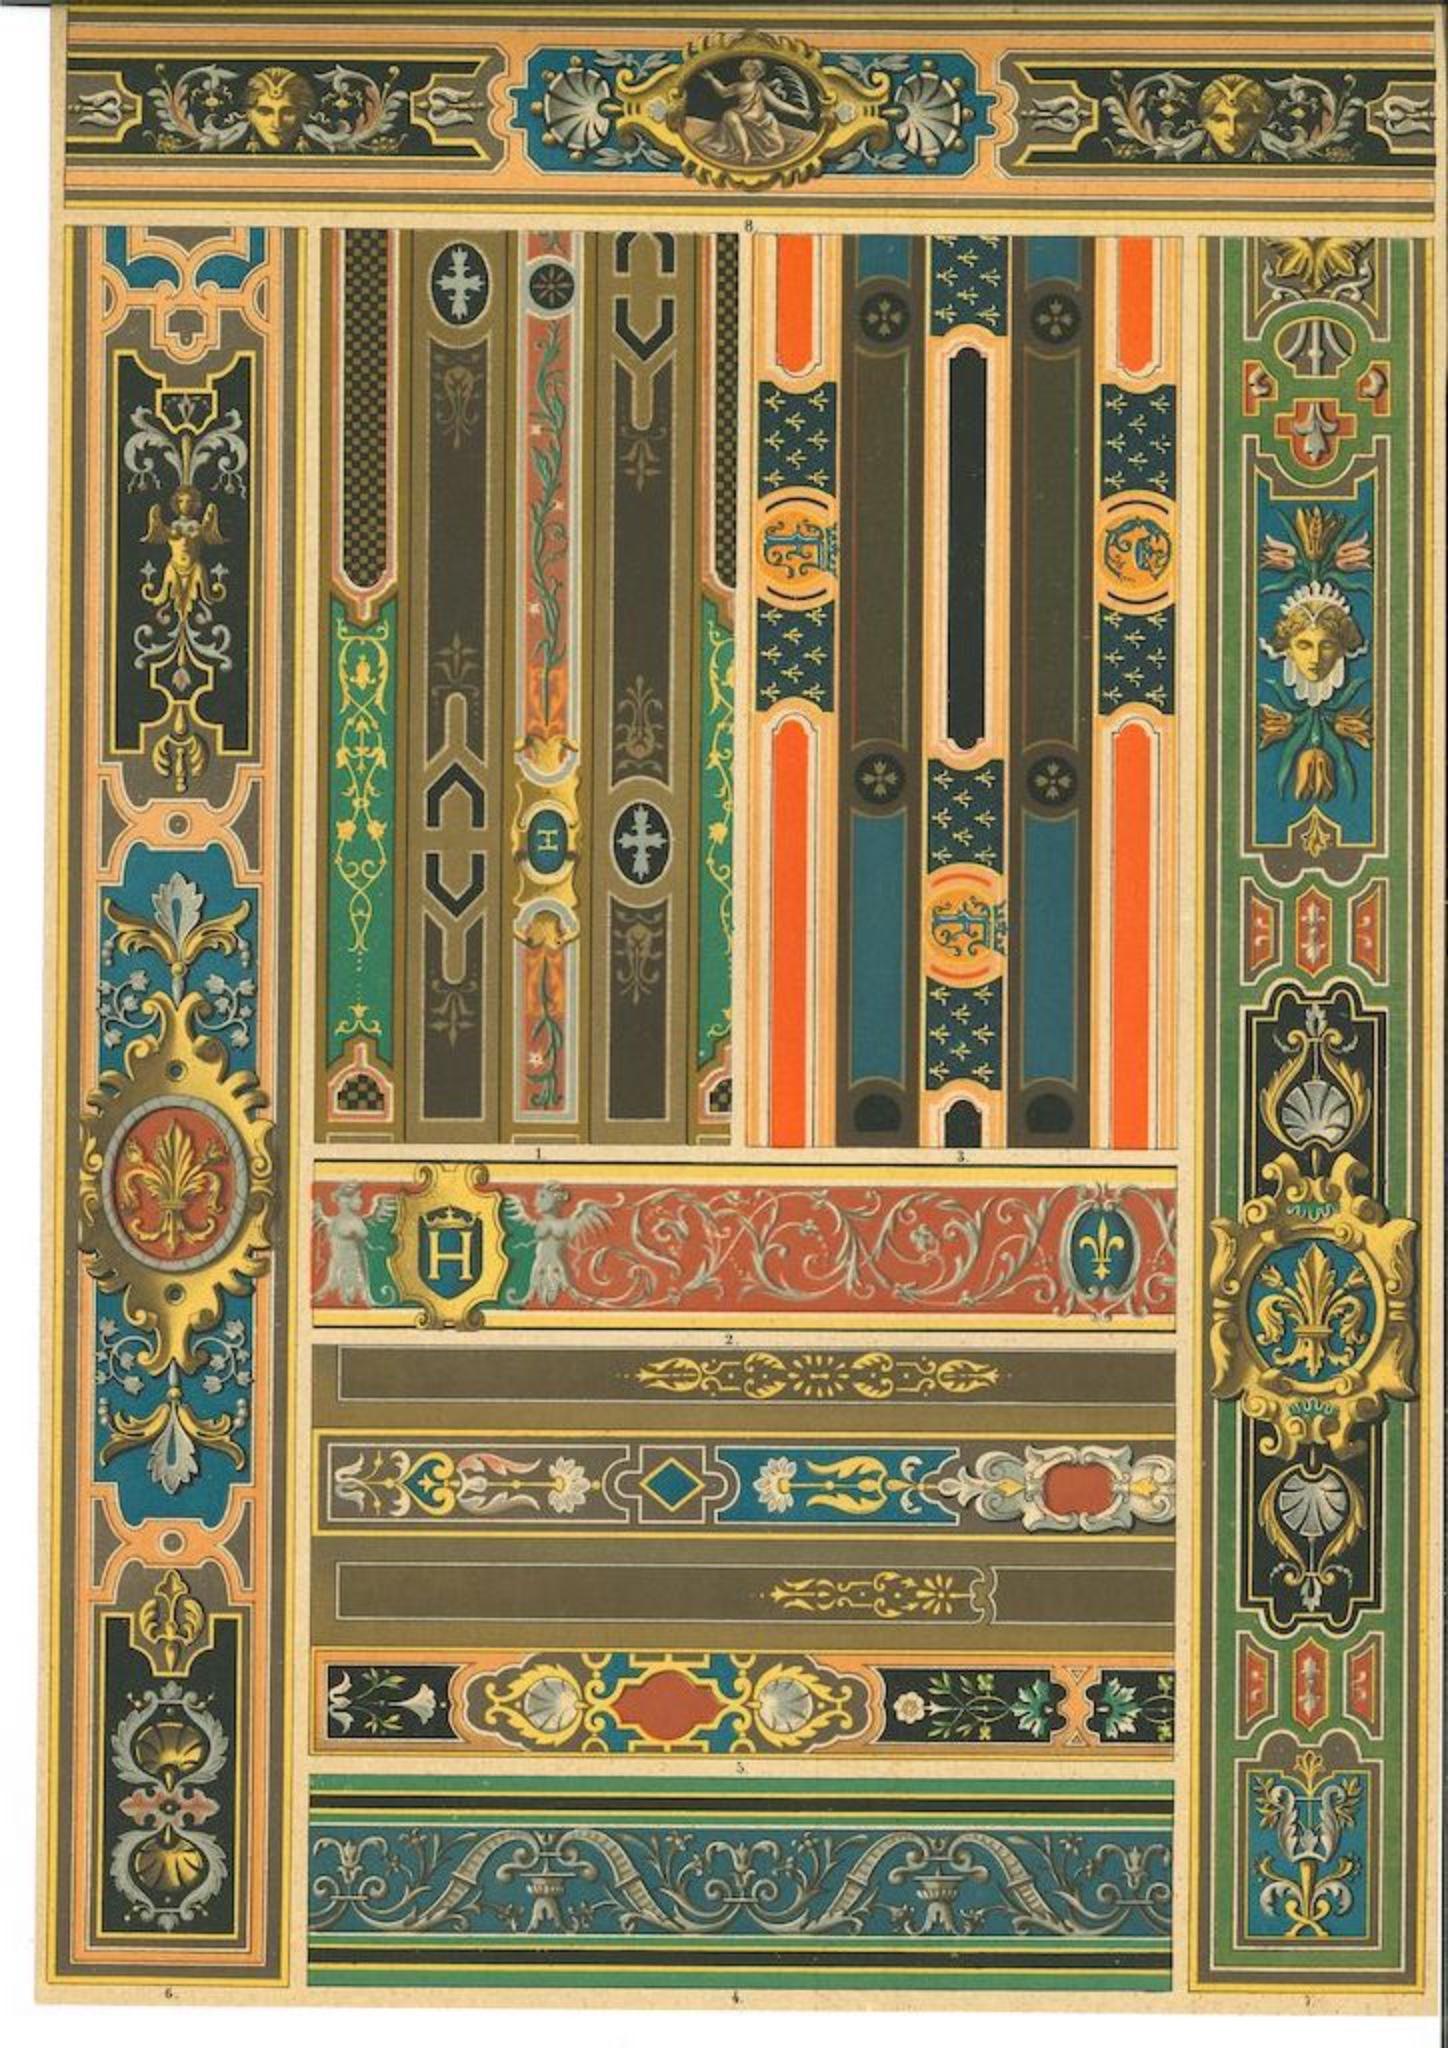 Unknown Abstract Print - Decorative Motifs of the French Renaissance -Chromolithograph-Early 20th Century